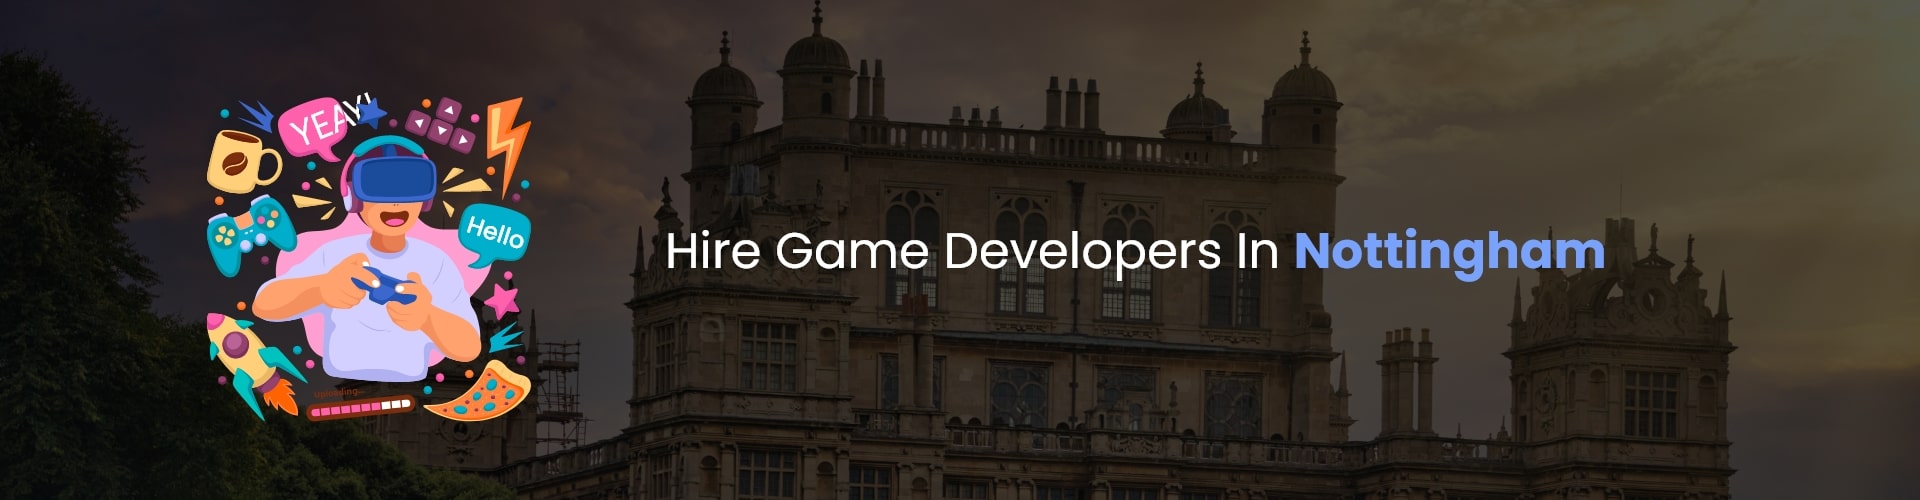 hire game developers in nottingham